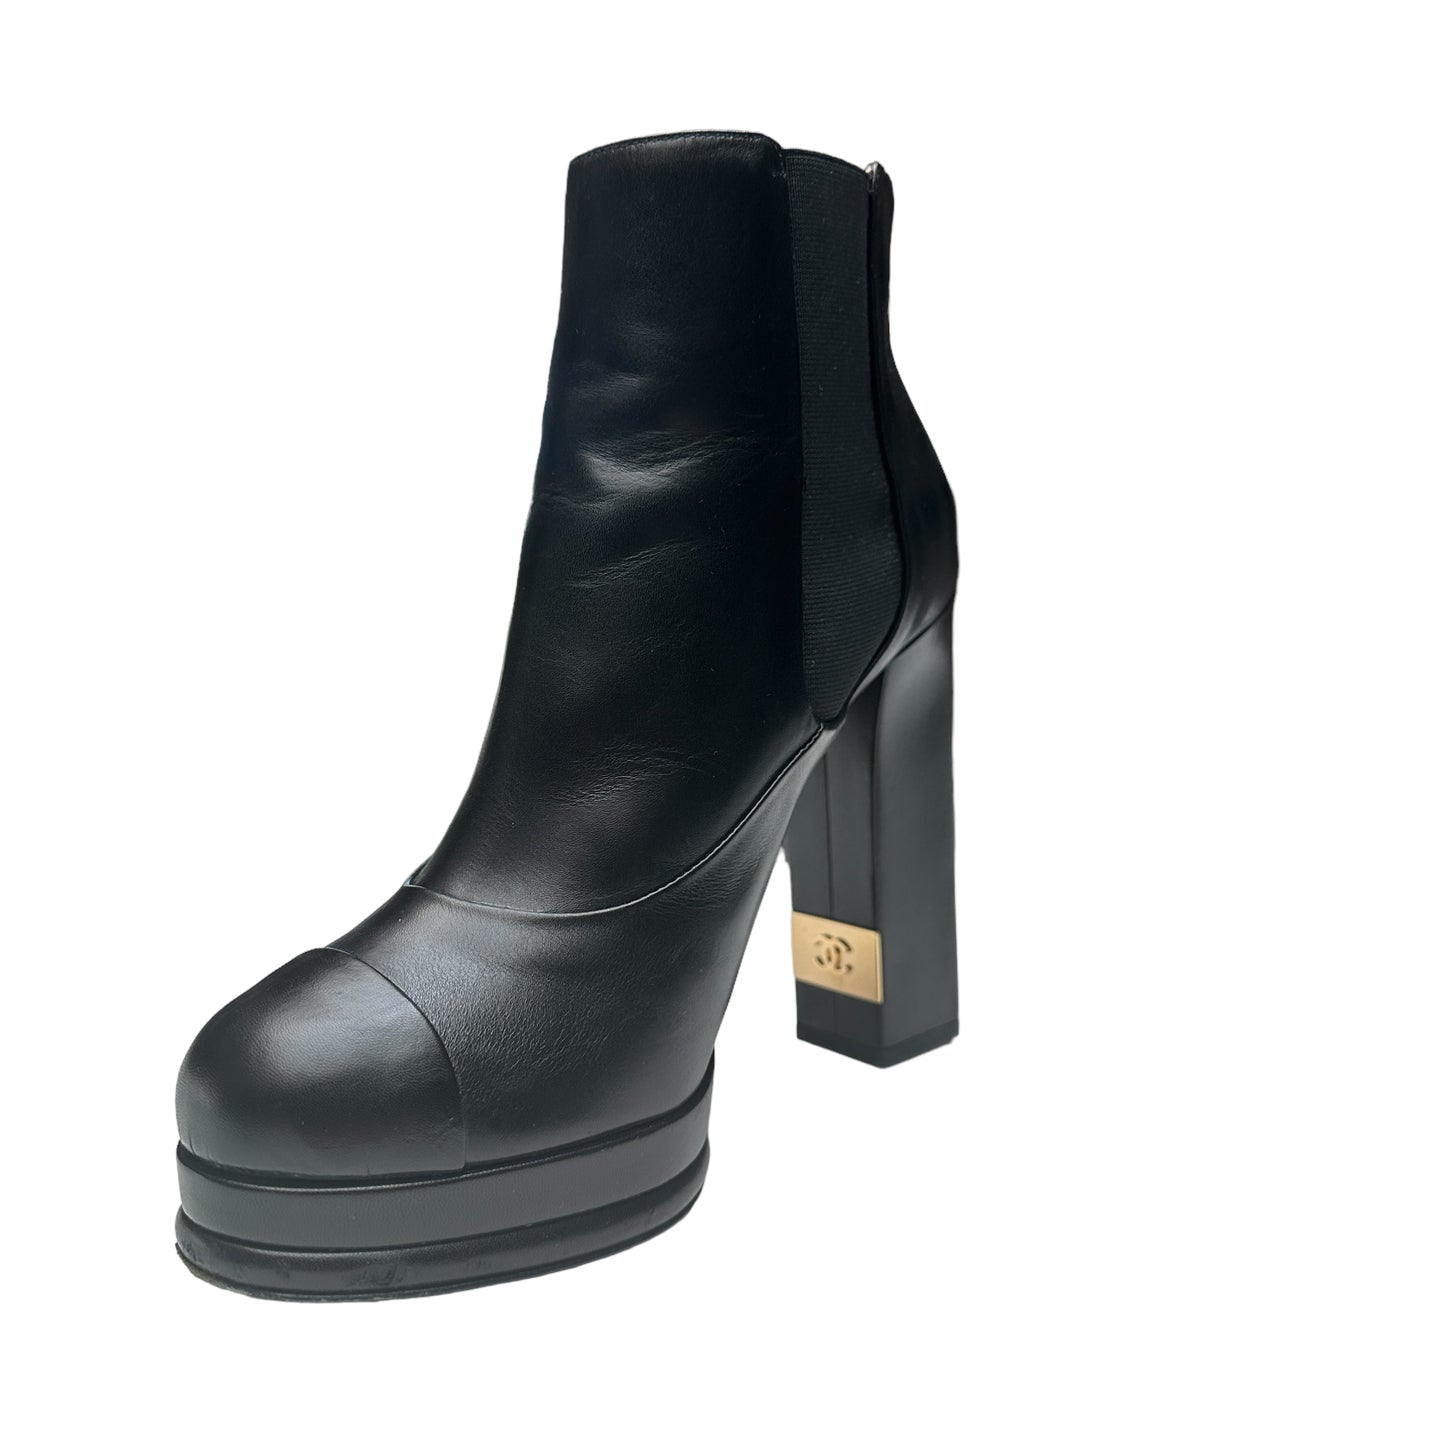 Black Leather Boots w/Logo - 8.5